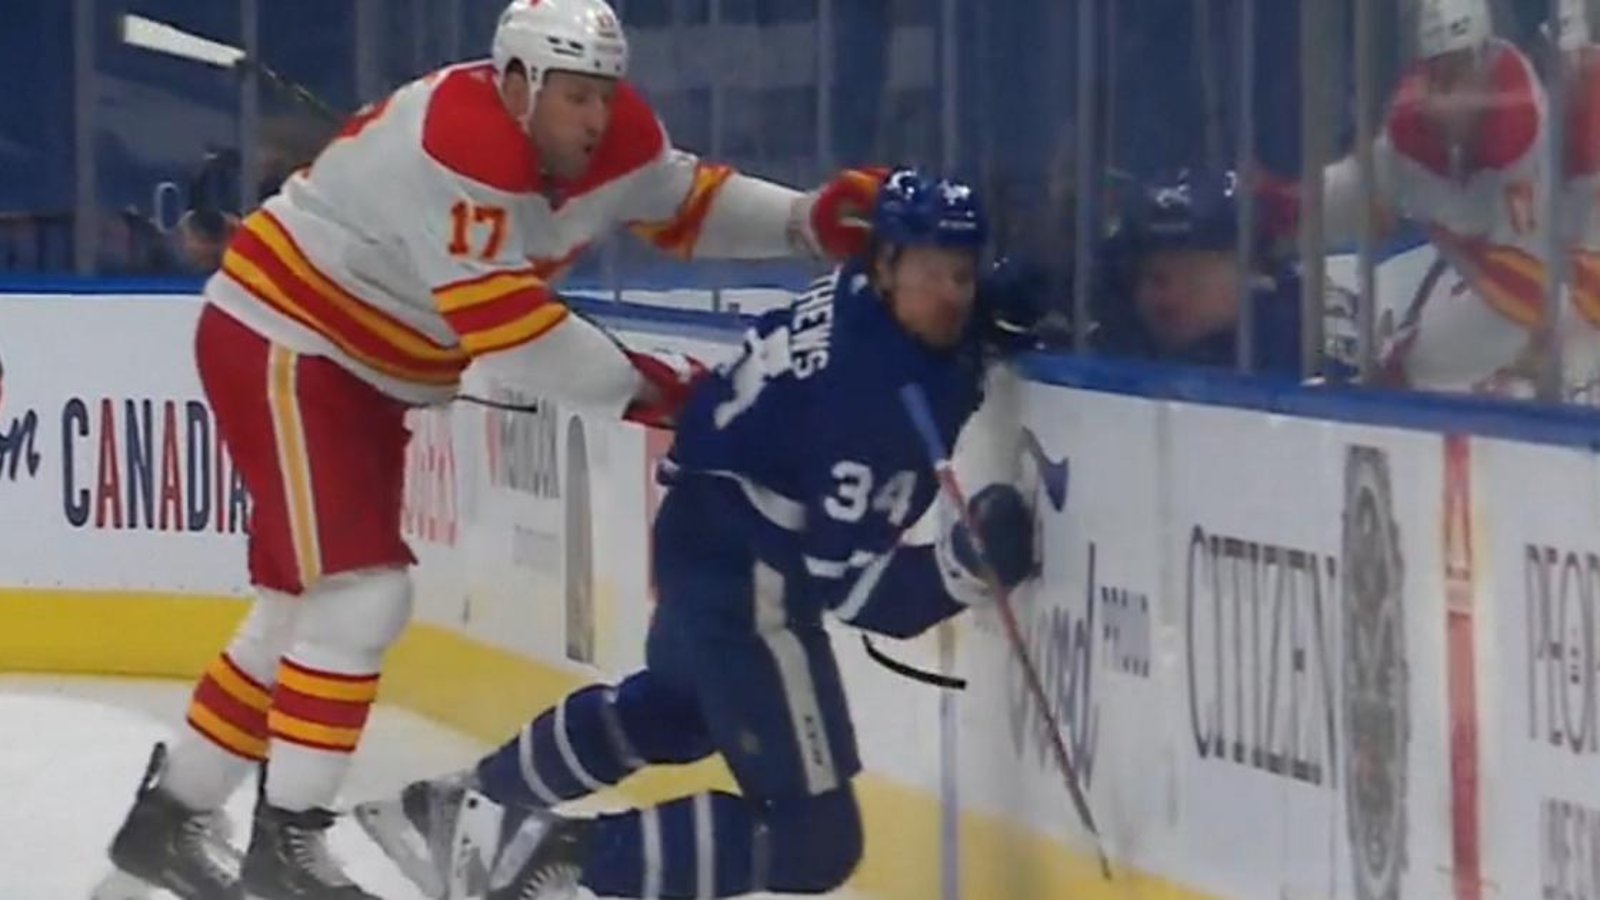 Milan Lucic sends Auston Matthews into the boards with a hit from behind.